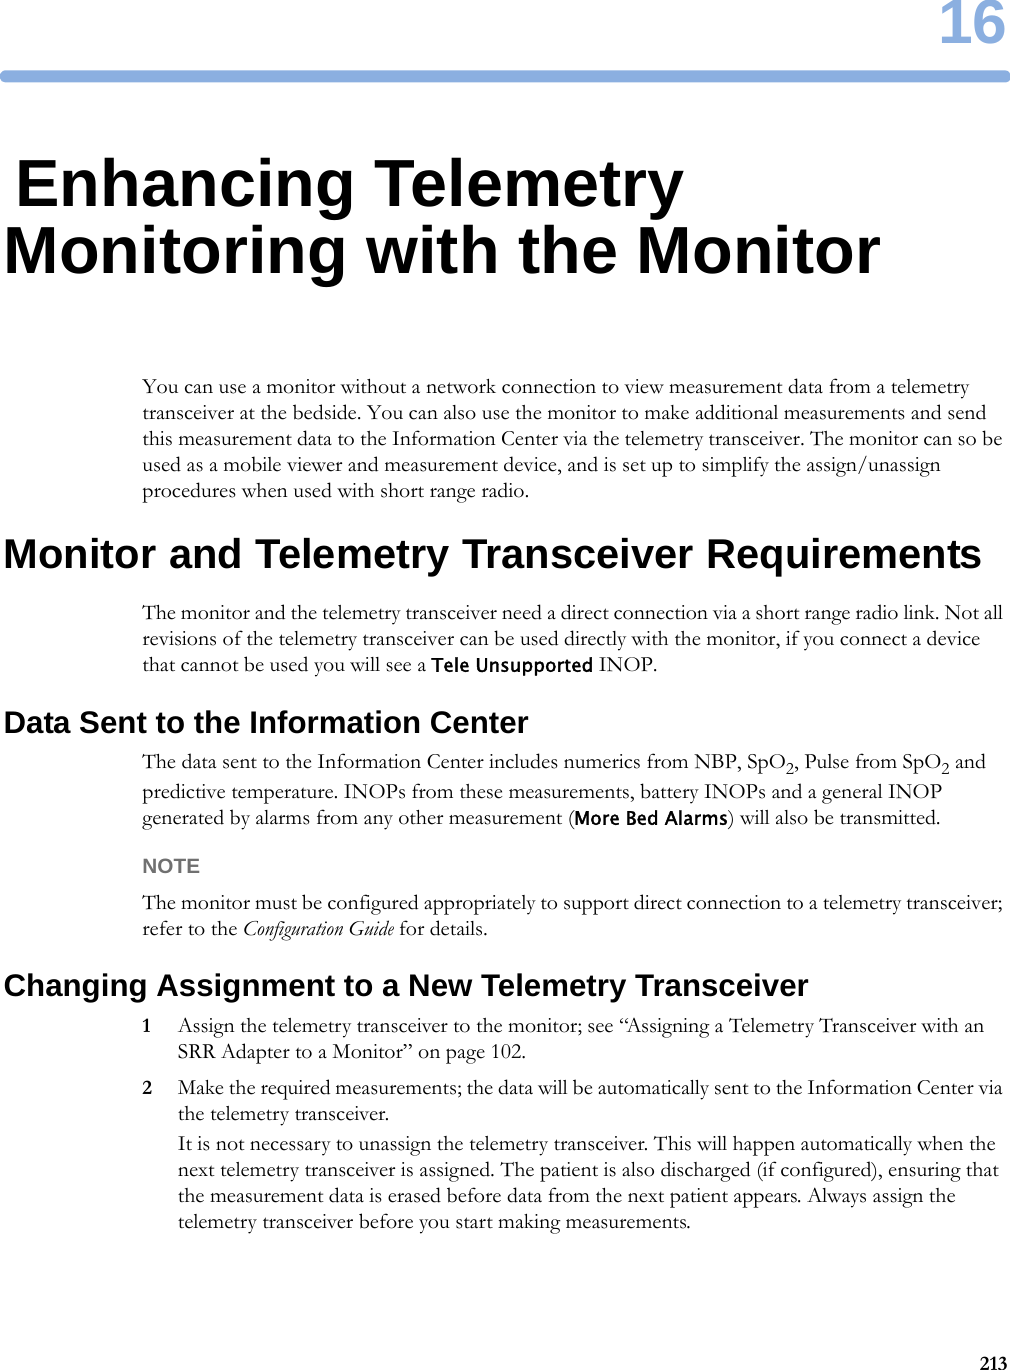 1621316Enhancing Telemetry Monitoring with the MonitorYou can use a monitor without a network connection to view measurement data from a telemetry transceiver at the bedside. You can also use the monitor to make additional measurements and send this measurement data to the Information Center via the telemetry transceiver. The monitor can so be used as a mobile viewer and measurement device, and is set up to simplify the assign/unassign procedures when used with short range radio.Monitor and Telemetry Transceiver RequirementsThe monitor and the telemetry transceiver need a direct connection via a short range radio link. Not all revisions of the telemetry transceiver can be used directly with the monitor, if you connect a device that cannot be used you will see a Tele Unsupported INOP.Data Sent to the Information CenterThe data sent to the Information Center includes numerics from NBP, SpO2, Pulse from SpO2 and predictive temperature. INOPs from these measurements, battery INOPs and a general INOP generated by alarms from any other measurement (More Bed Alarms) will also be transmitted.NOTEThe monitor must be configured appropriately to support direct connection to a telemetry transceiver; refer to the Configuration Guide for details.Changing Assignment to a New Telemetry Transceiver1Assign the telemetry transceiver to the monitor; see “Assigning a Telemetry Transceiver with an SRR Adapter to a Monitor” on page 102.2Make the required measurements; the data will be automatically sent to the Information Center via the telemetry transceiver.It is not necessary to unassign the telemetry transceiver. This will happen automatically when the next telemetry transceiver is assigned. The patient is also discharged (if configured), ensuring that the measurement data is erased before data from the next patient appears. Always assign the telemetry transceiver before you start making measurements.